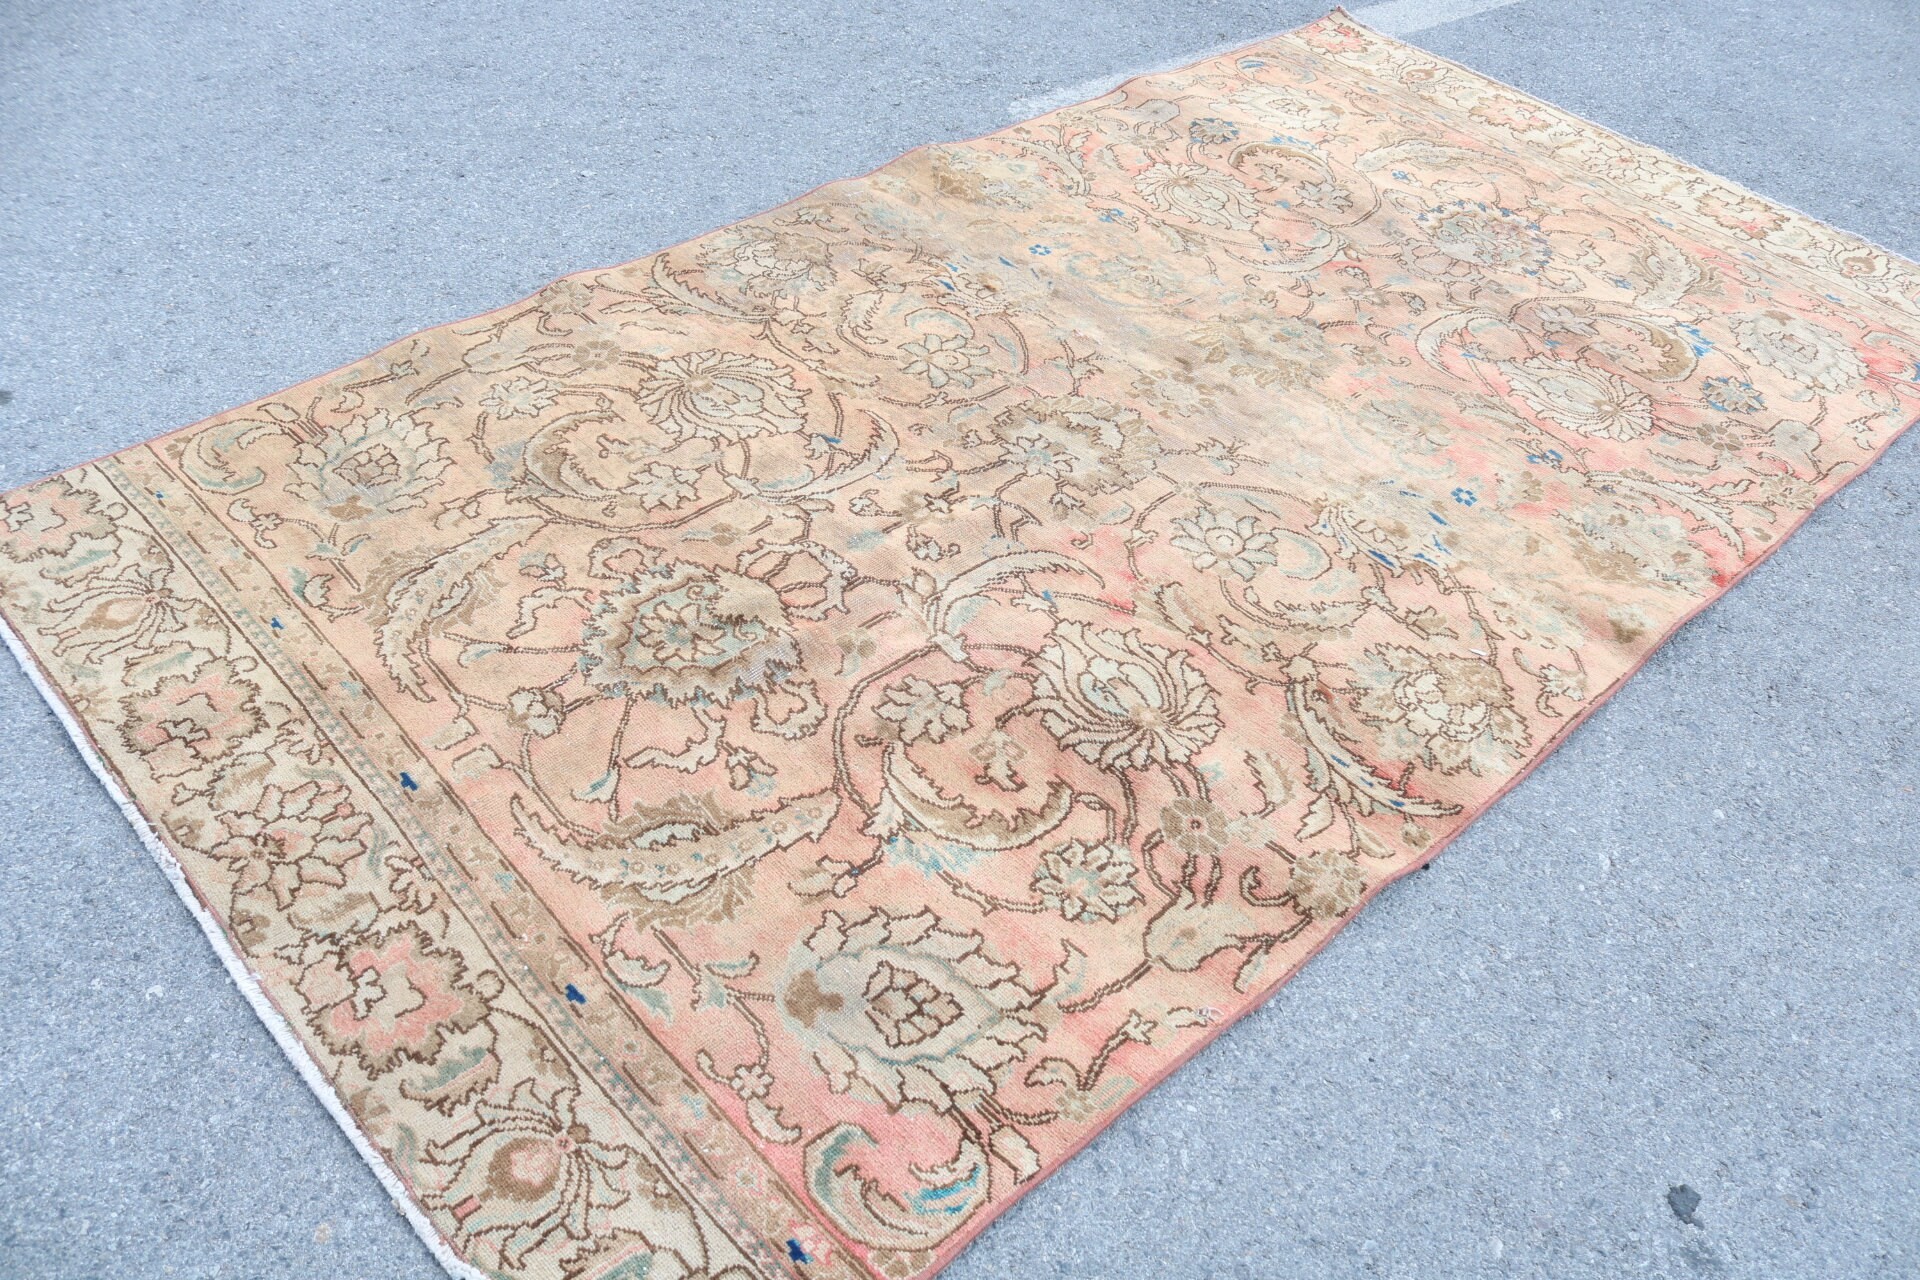 Wool Rug, Moroccan Rugs, Bedroom Rug, Large Vintage Rug Rugs, Salon Rug, Vintage Rug, Turkish Rug, Rugs for Salon, 5.1x9.7 ft Large Rugs